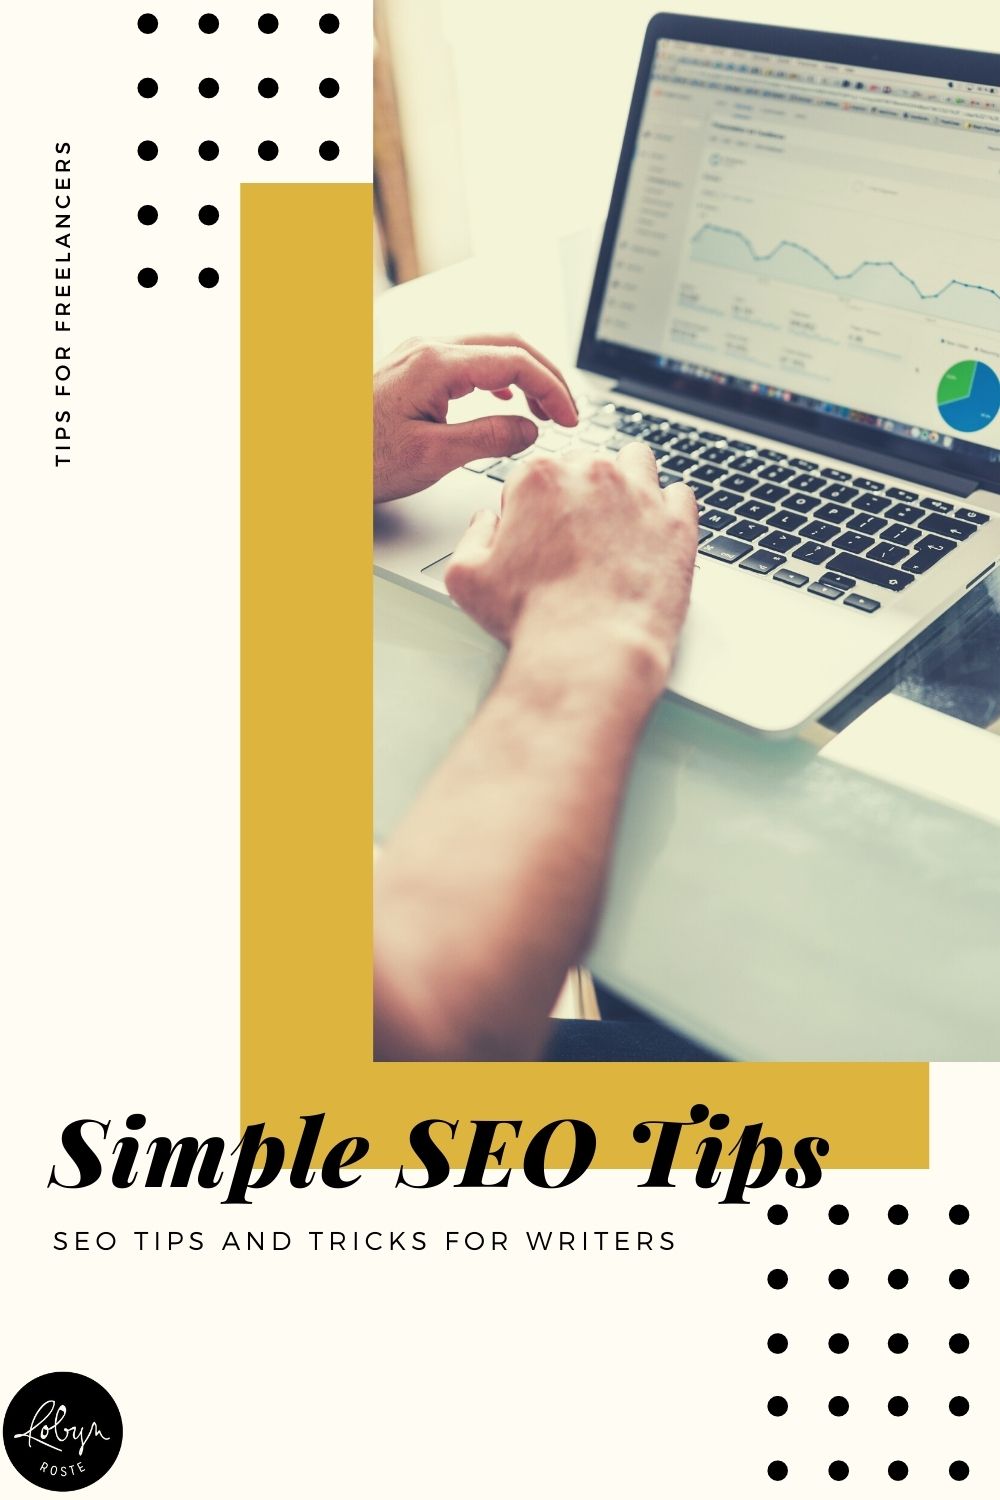 These SEO tips and tricks will help freelance writers understand how to vet a keyword to give their articles the best chance of being discovered.